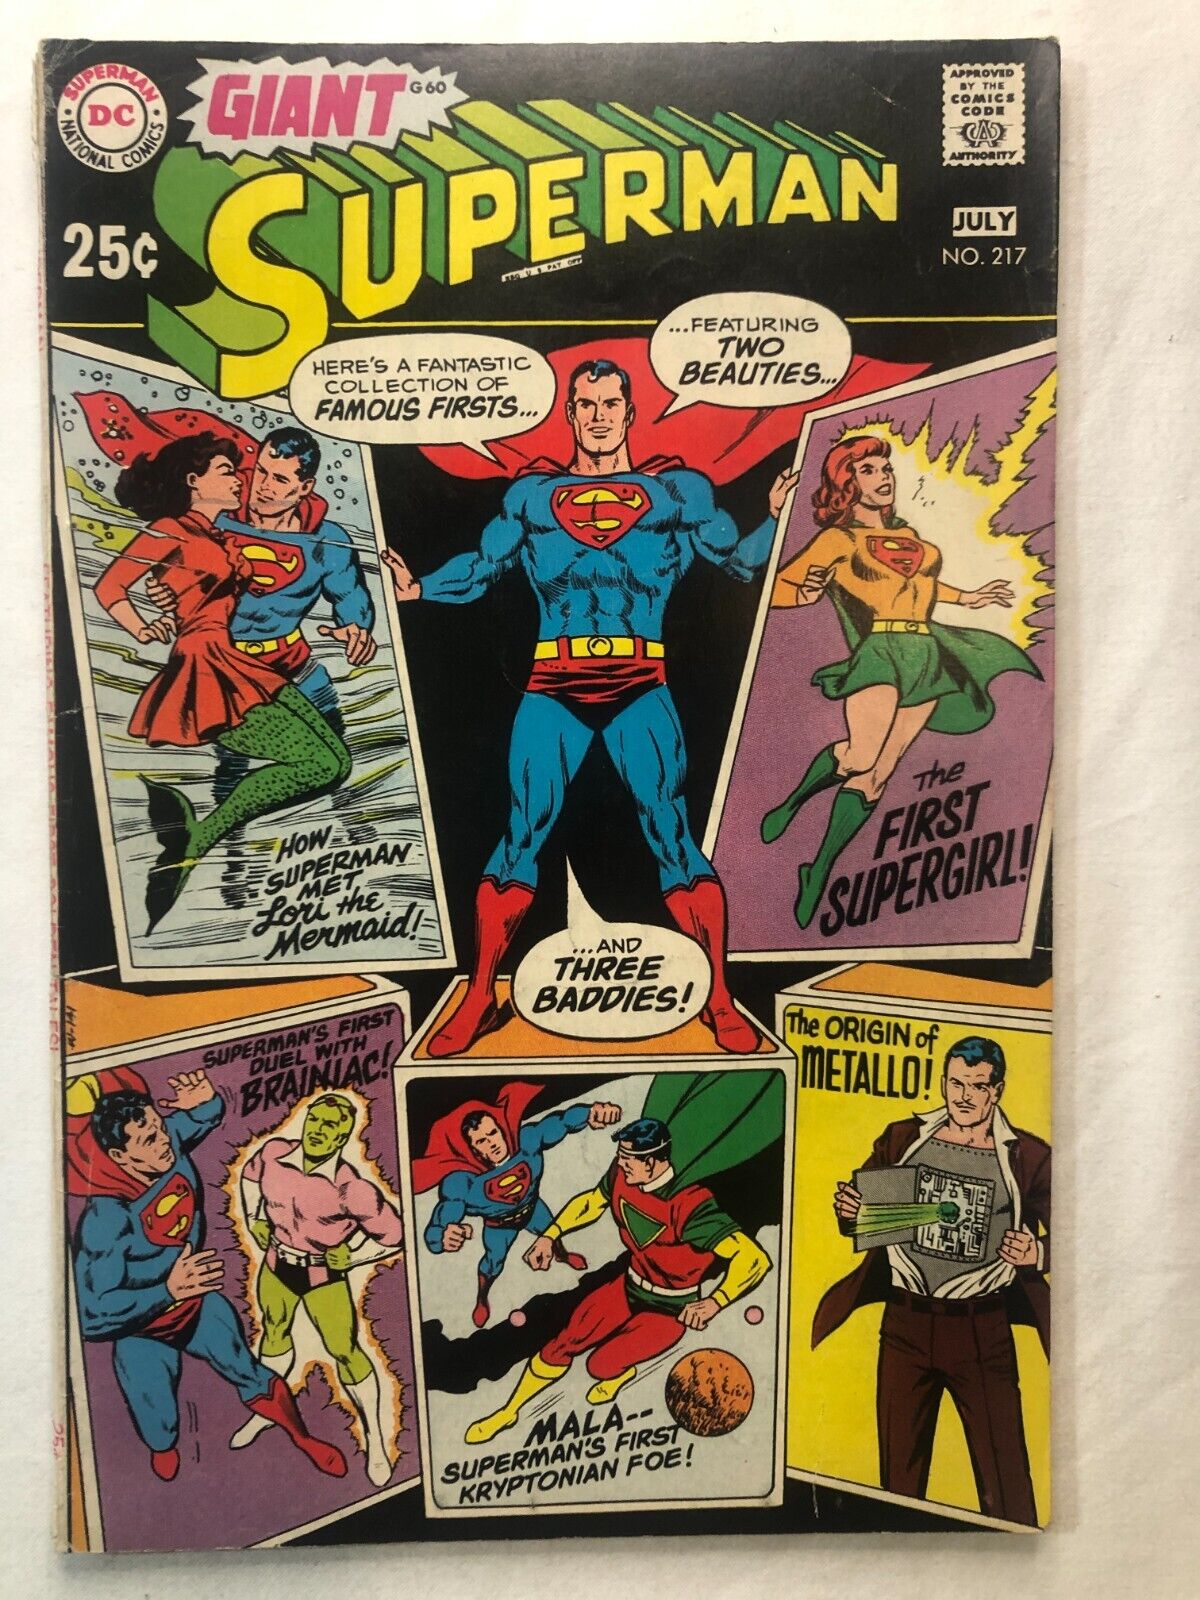 Superman #217 DC Comics August 1969 Vintage Silver Age Very Nice Condition